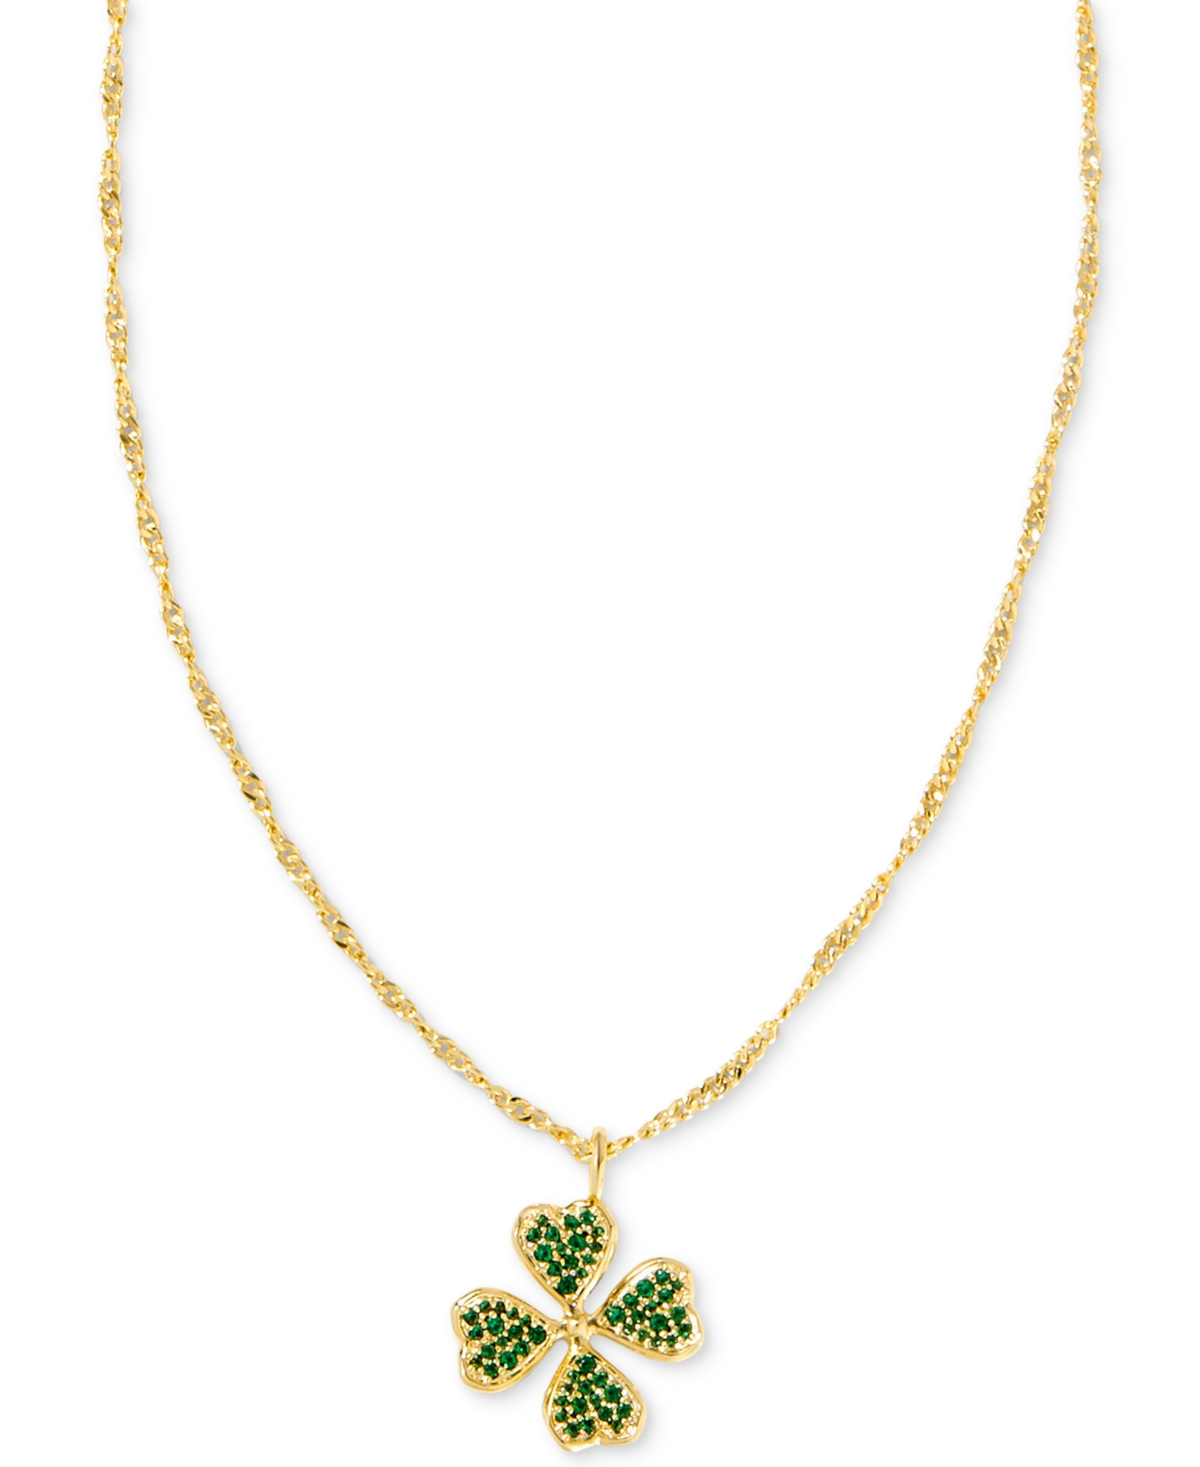 Kendra Scott 14k Gold-plated Color Pave Clover 19" Adjustable Pendant Necklace In Green Crystal